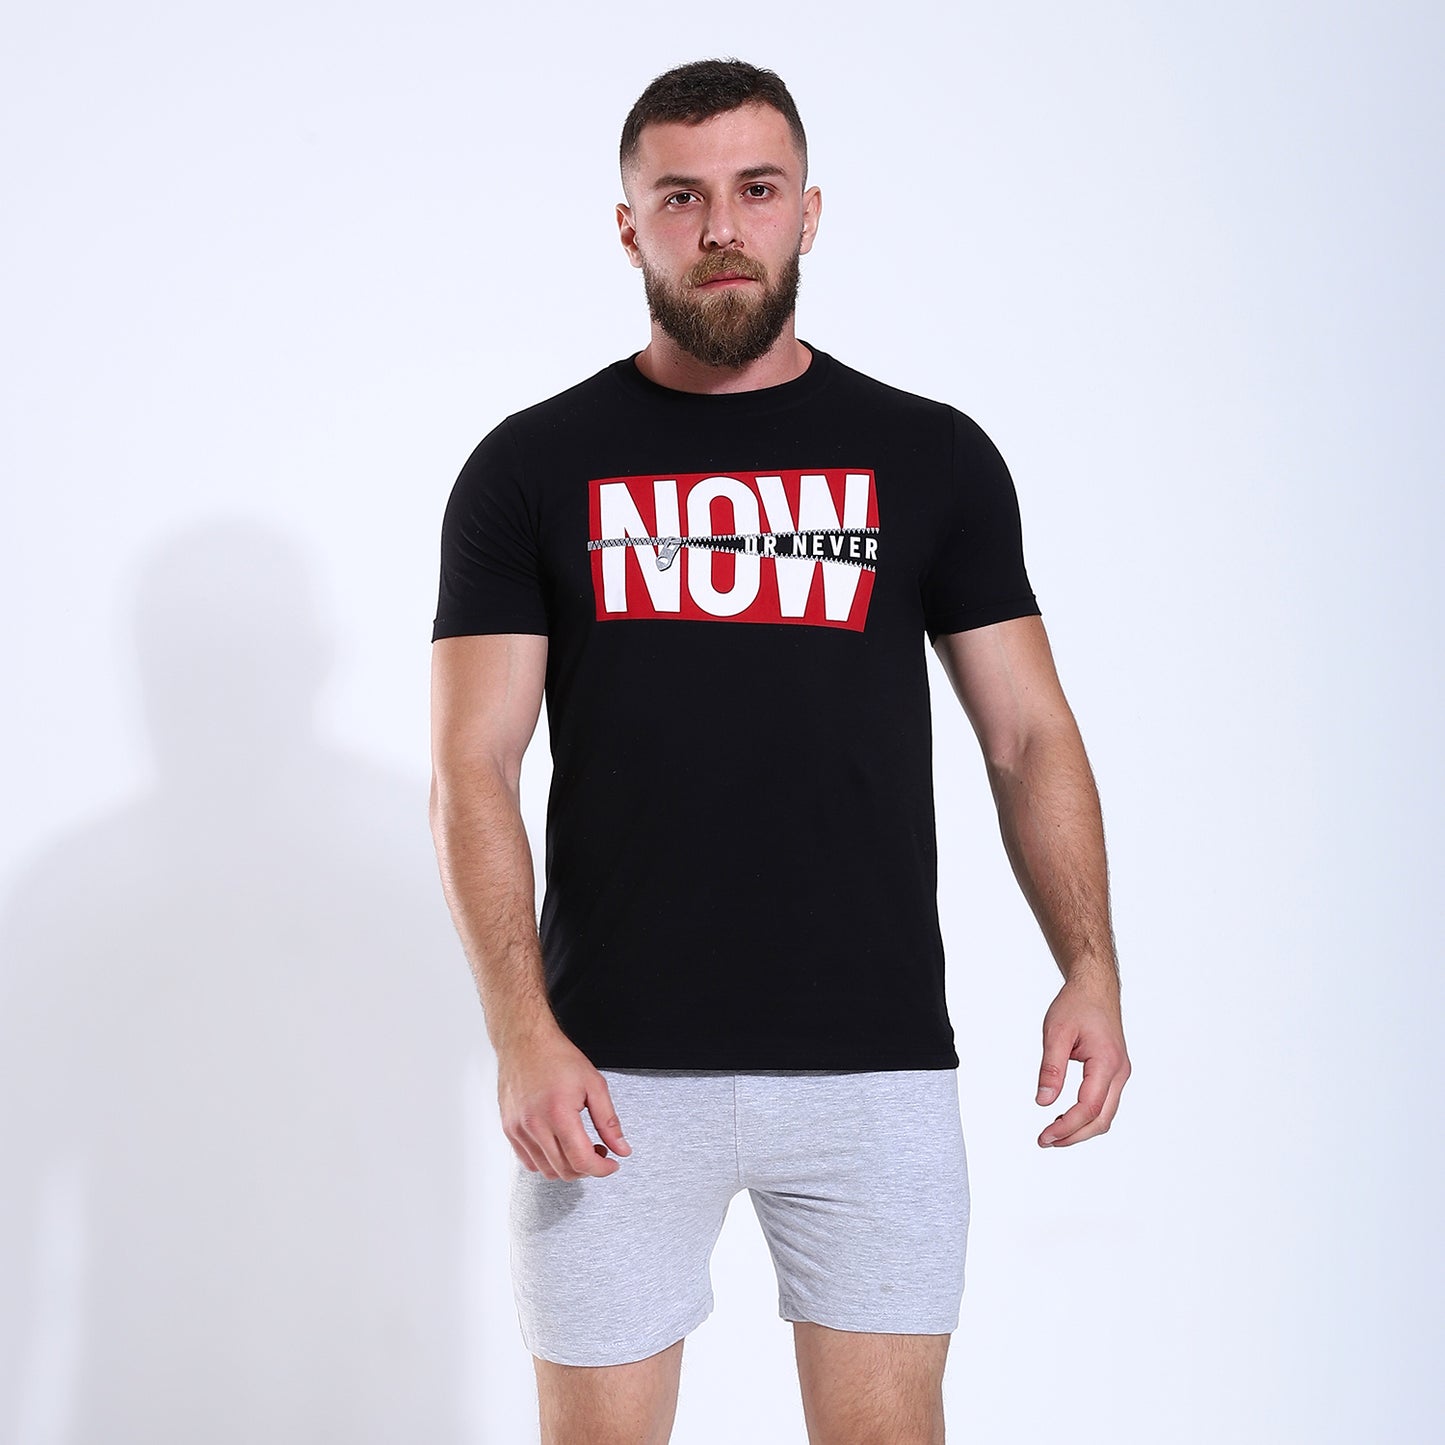 Men's "Now Or Never" Printed Short Sleeves Pajama212